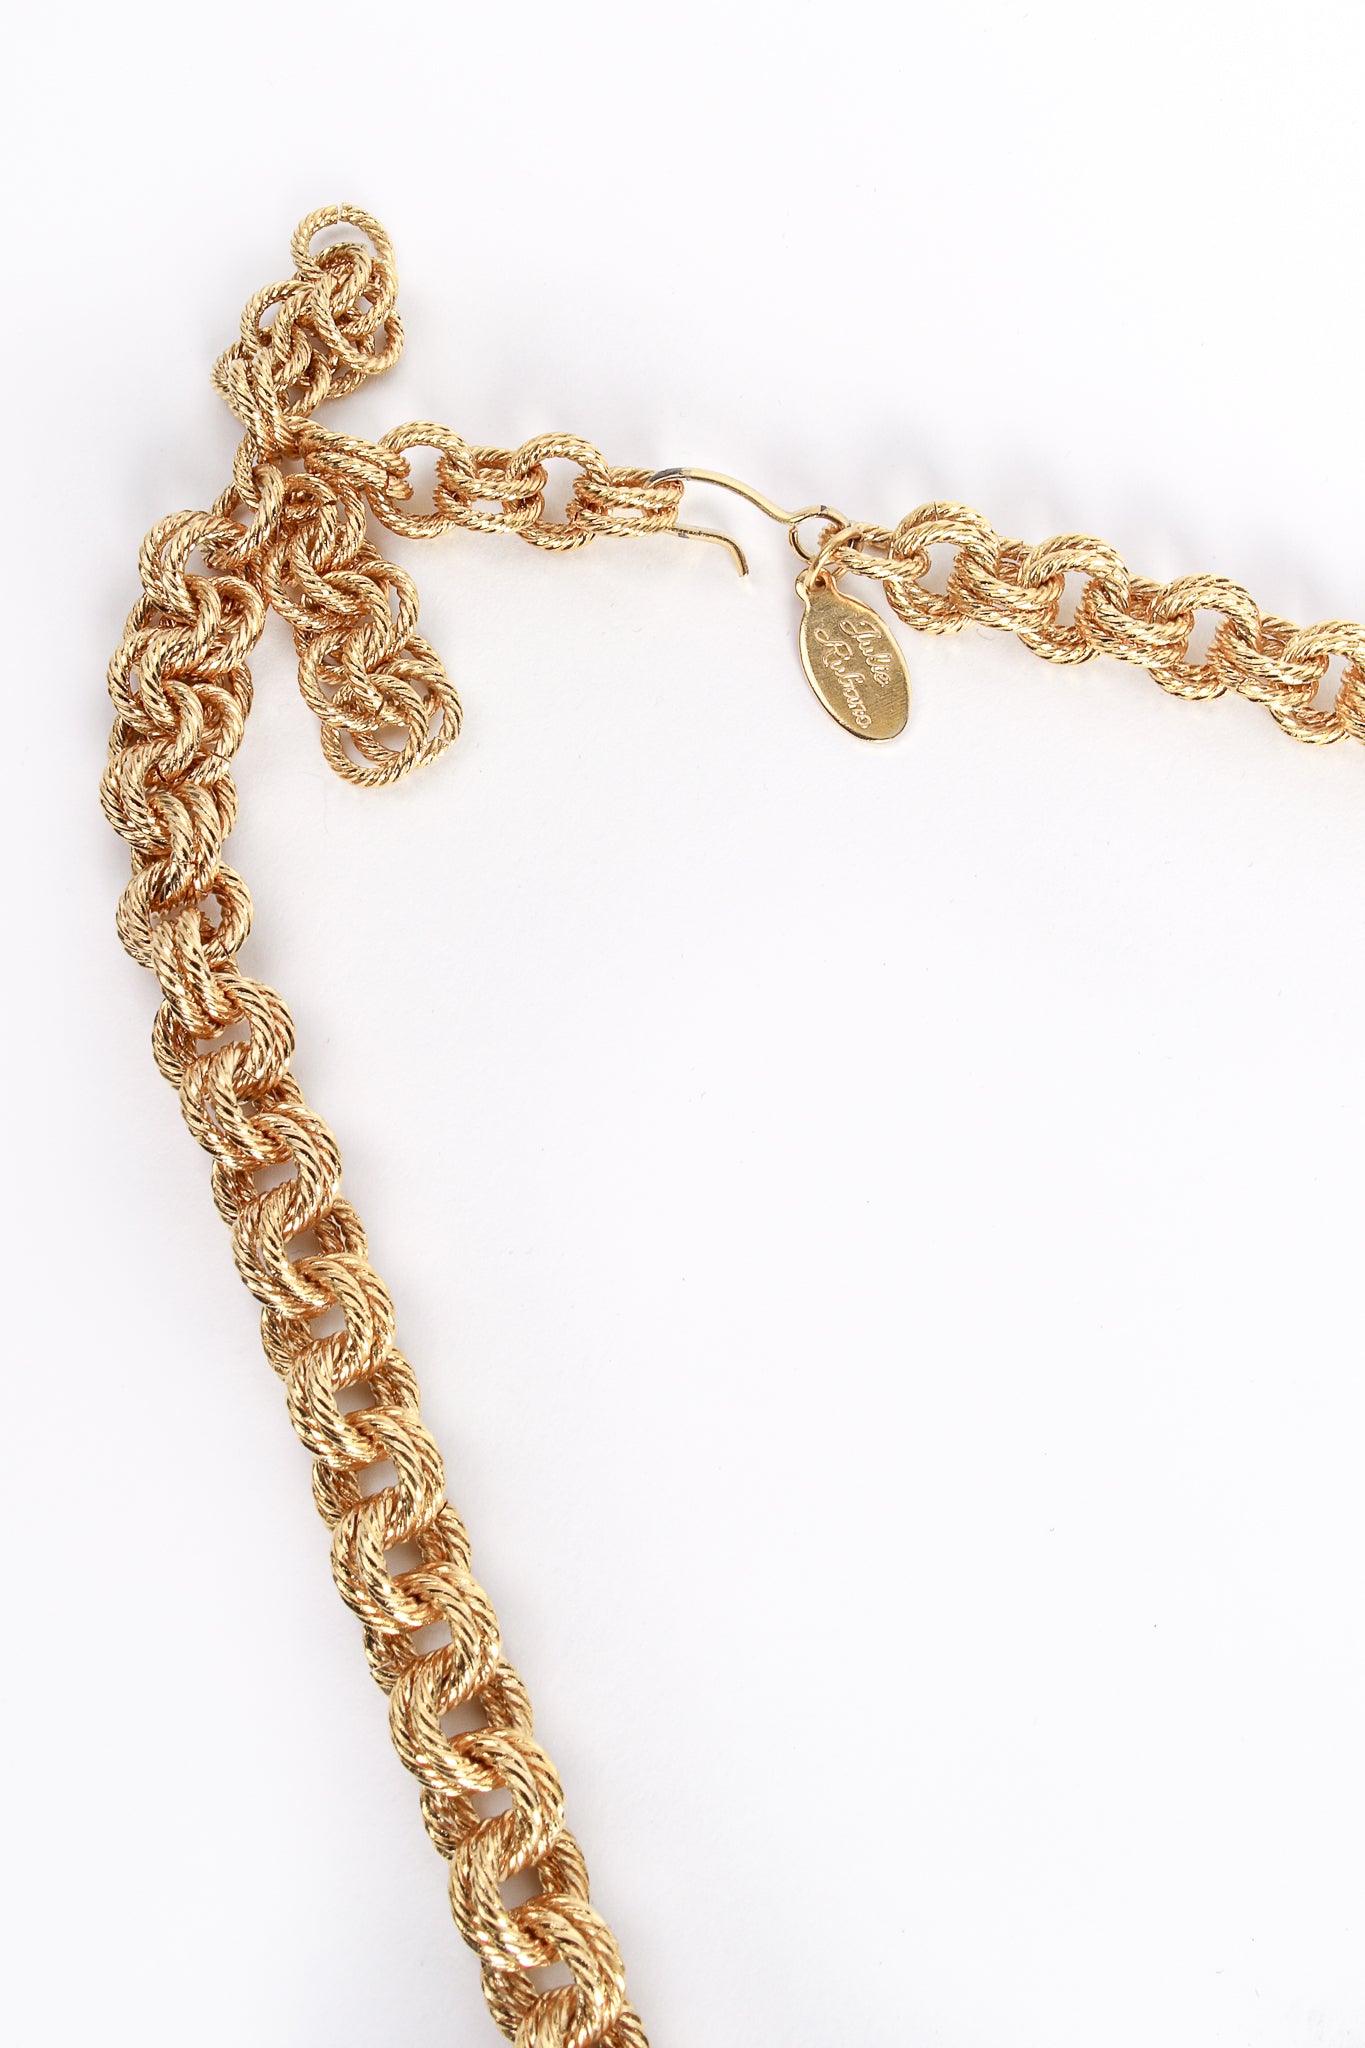 Vintage Julie Rubano Large Rings Chain Link Necklace Cartouche and Hook Closuep at Recess LA